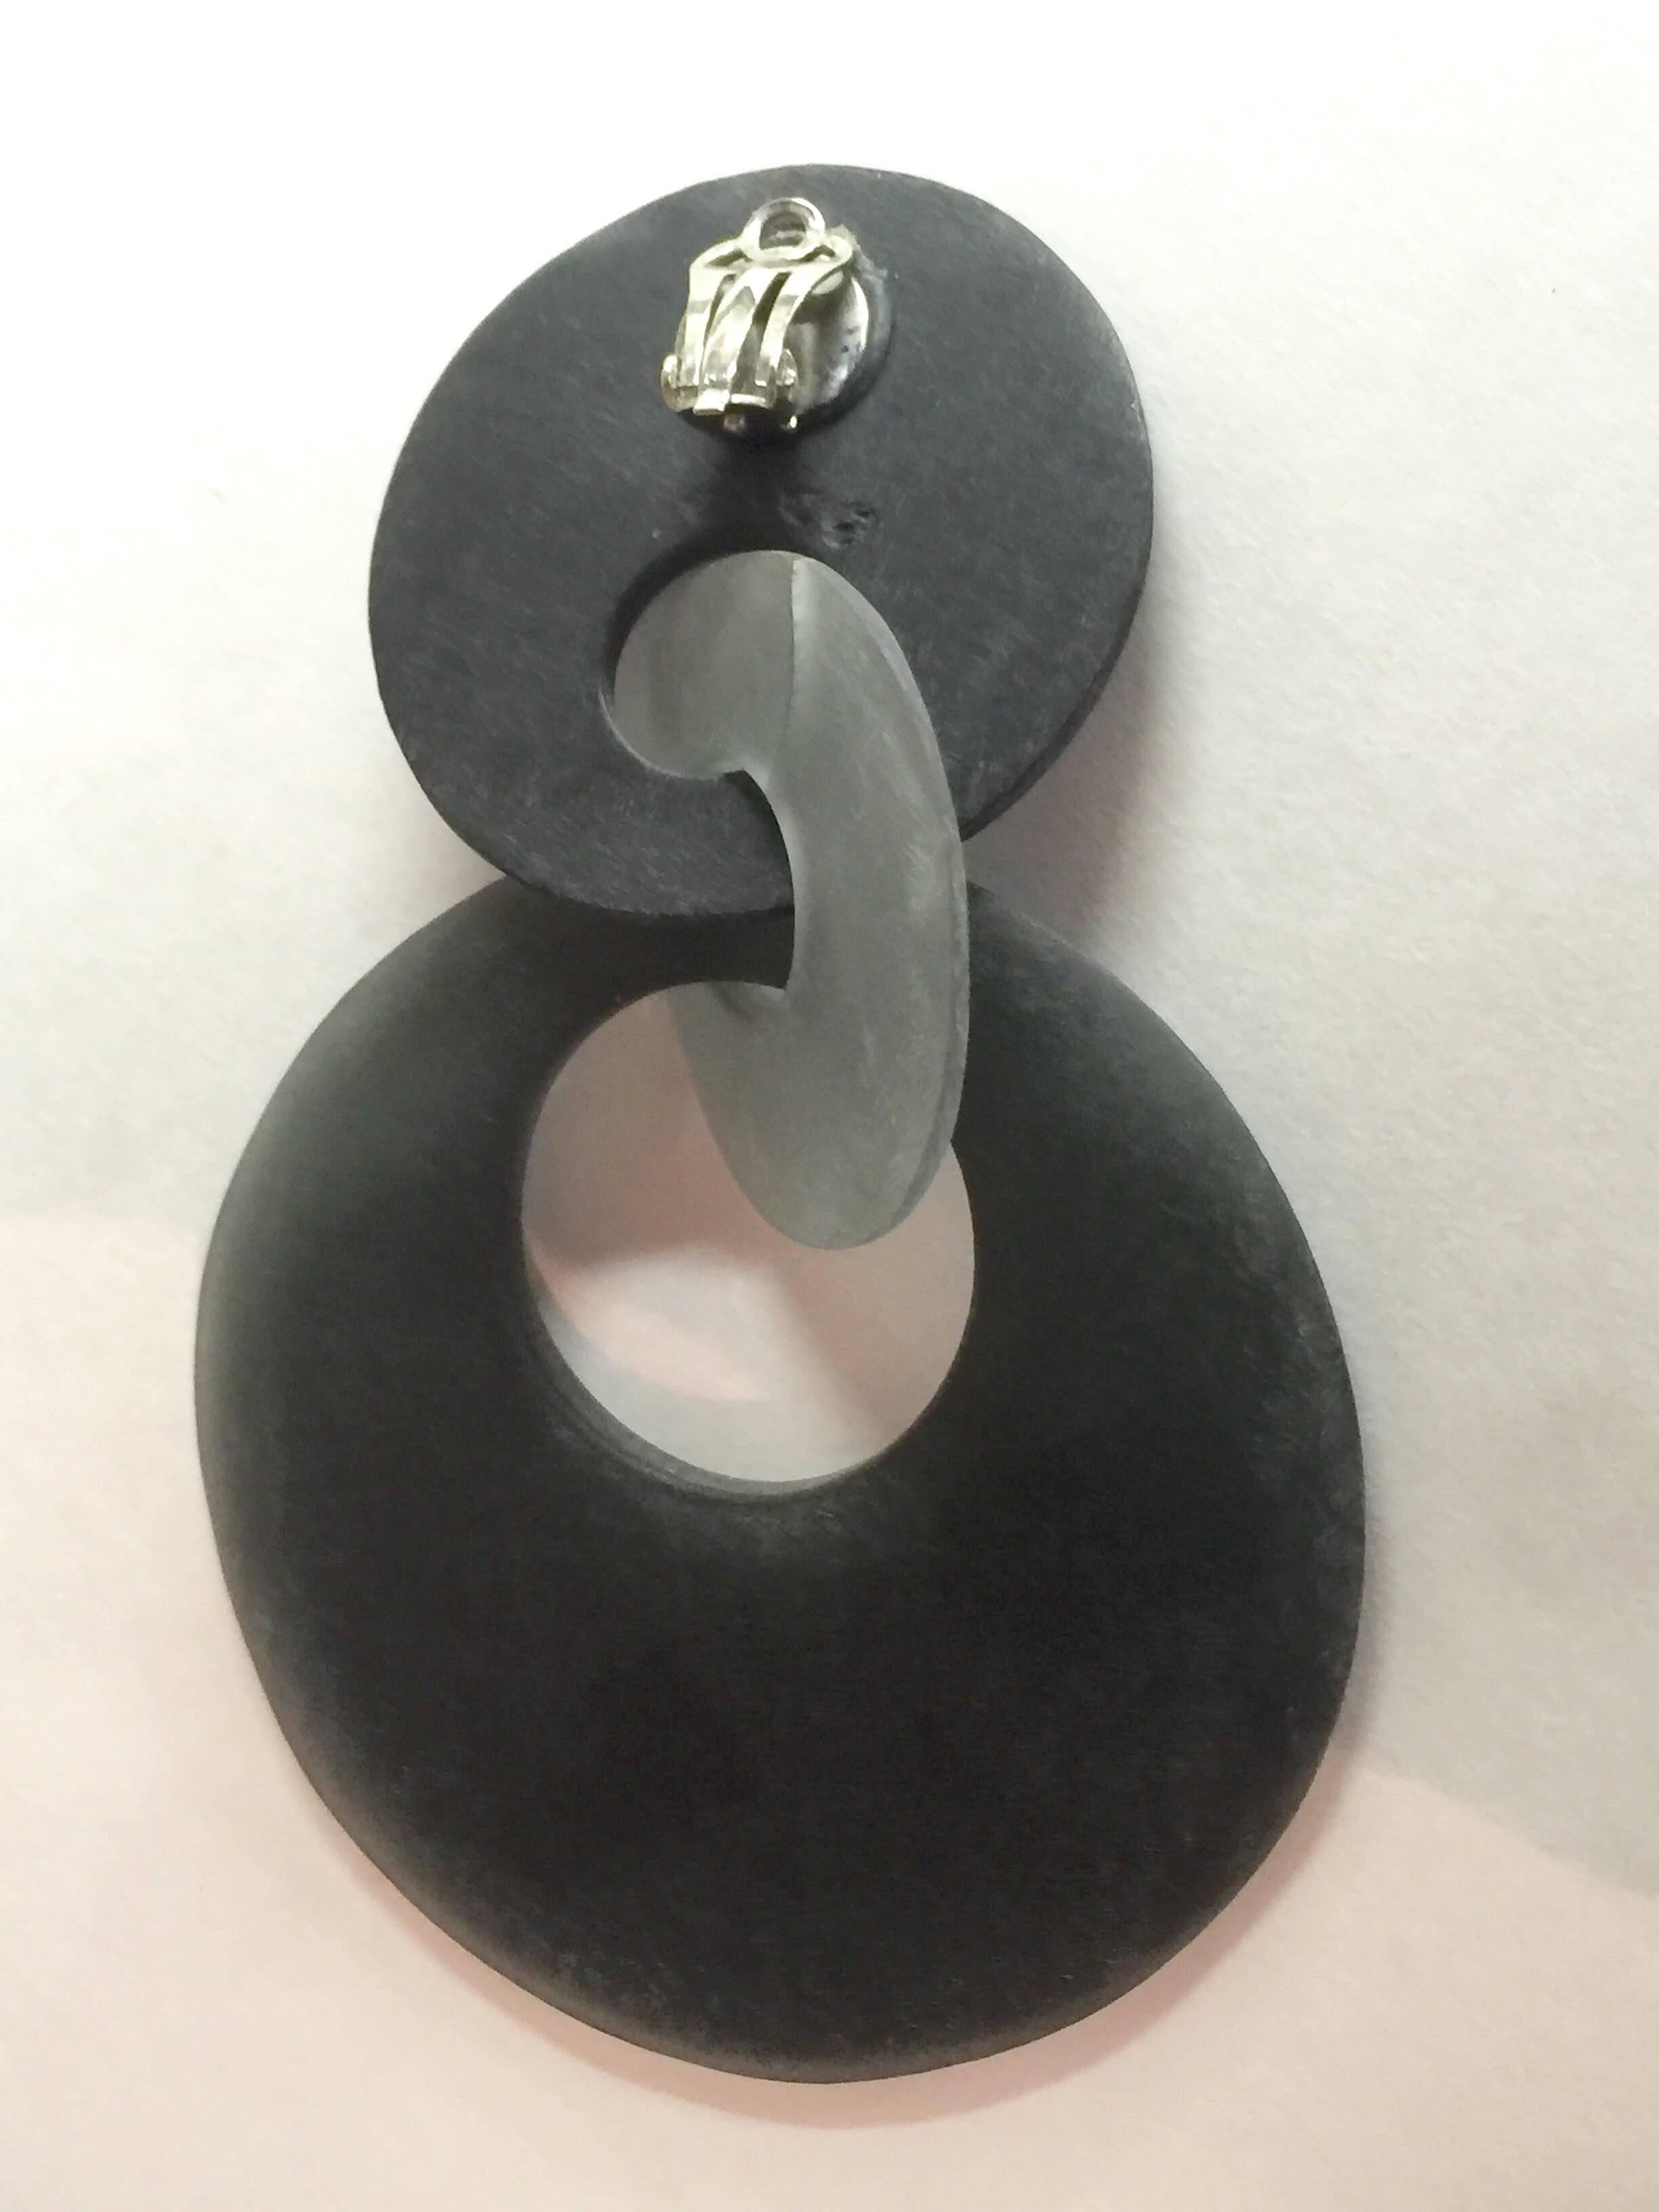 Stylish and sleek these Danish MONIES Gerda Lyngaarrd Matte Frosted Resin Geometric Drop Clip Earrings are super space age yet utterly organic and natural in tone. 2 pierced circles of subtly different gray hued matte frosted resin is interconnected